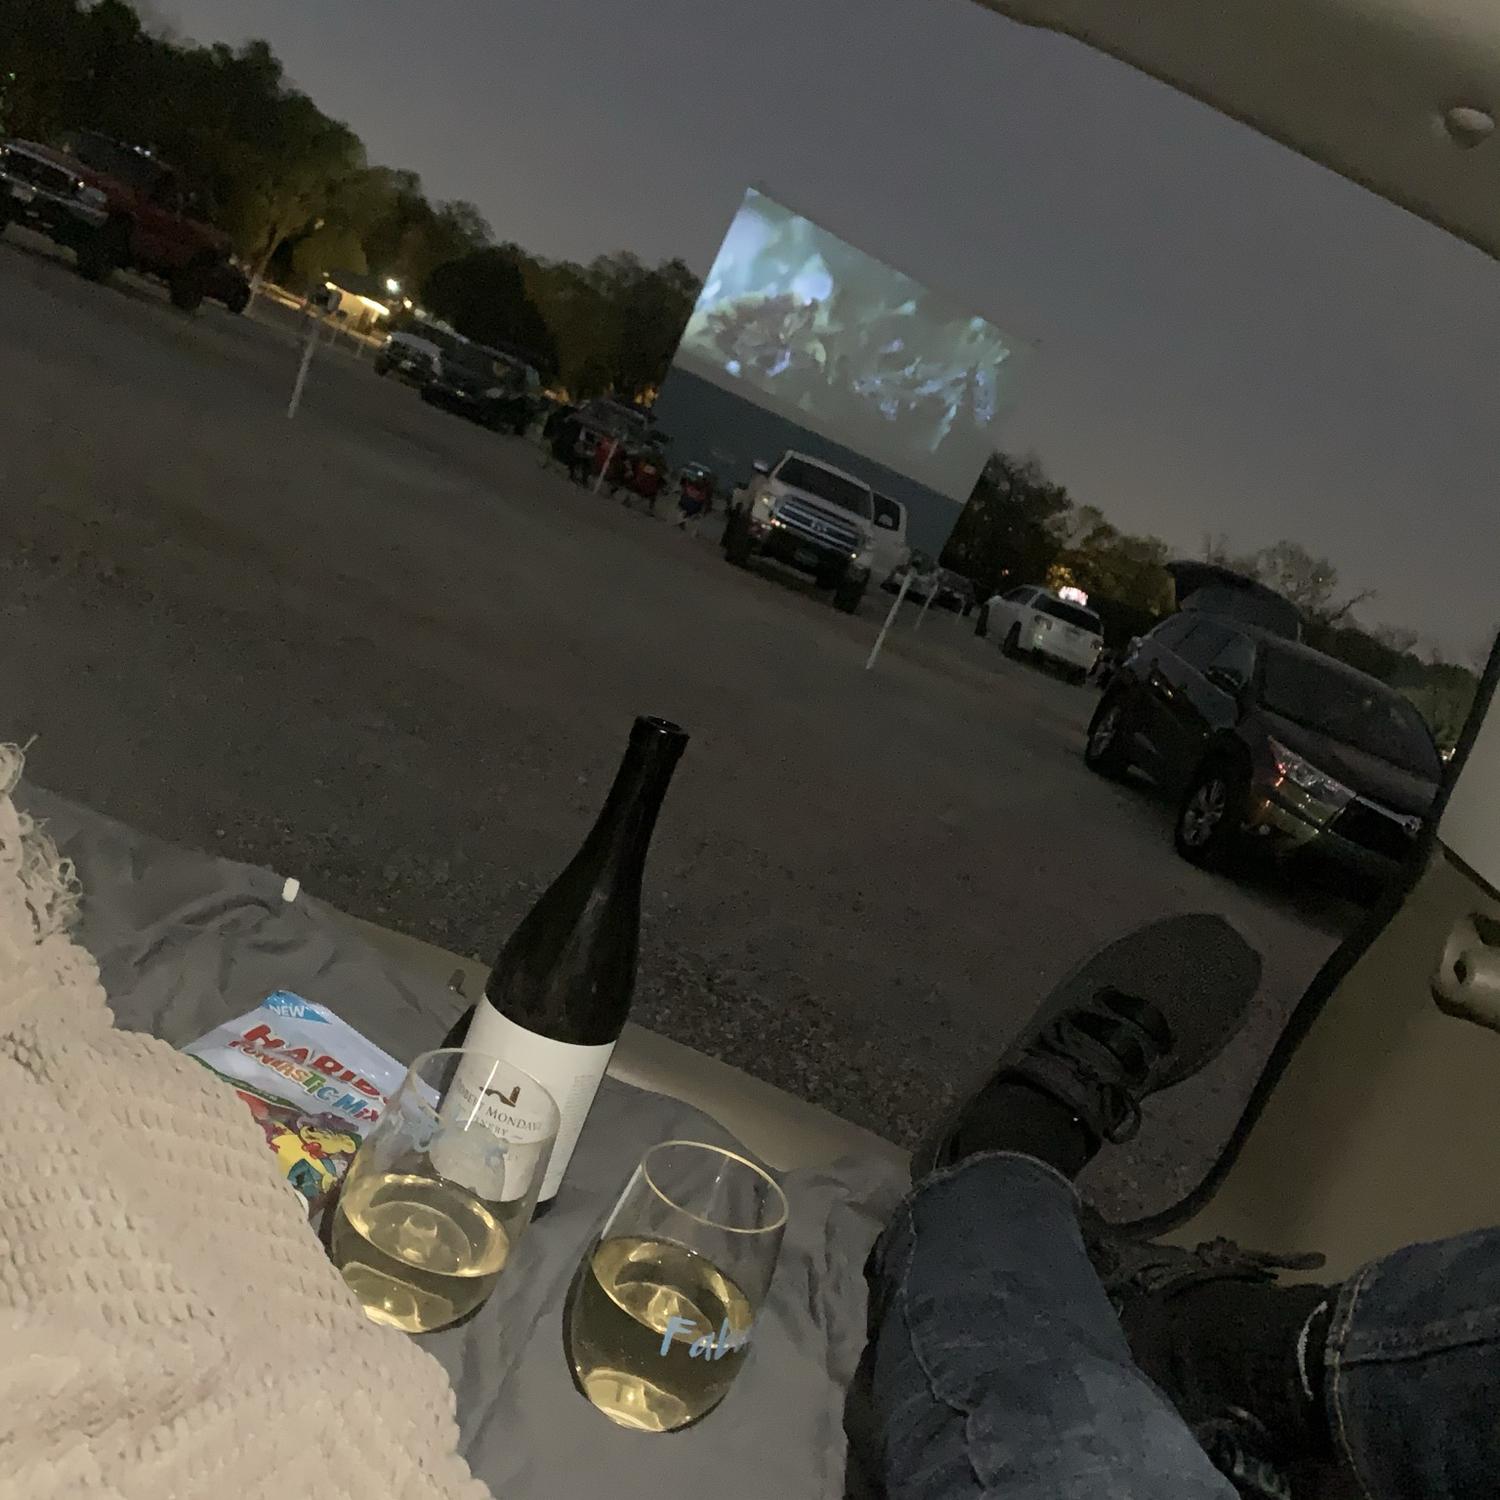 date night at the drive in movie theater! May 2021